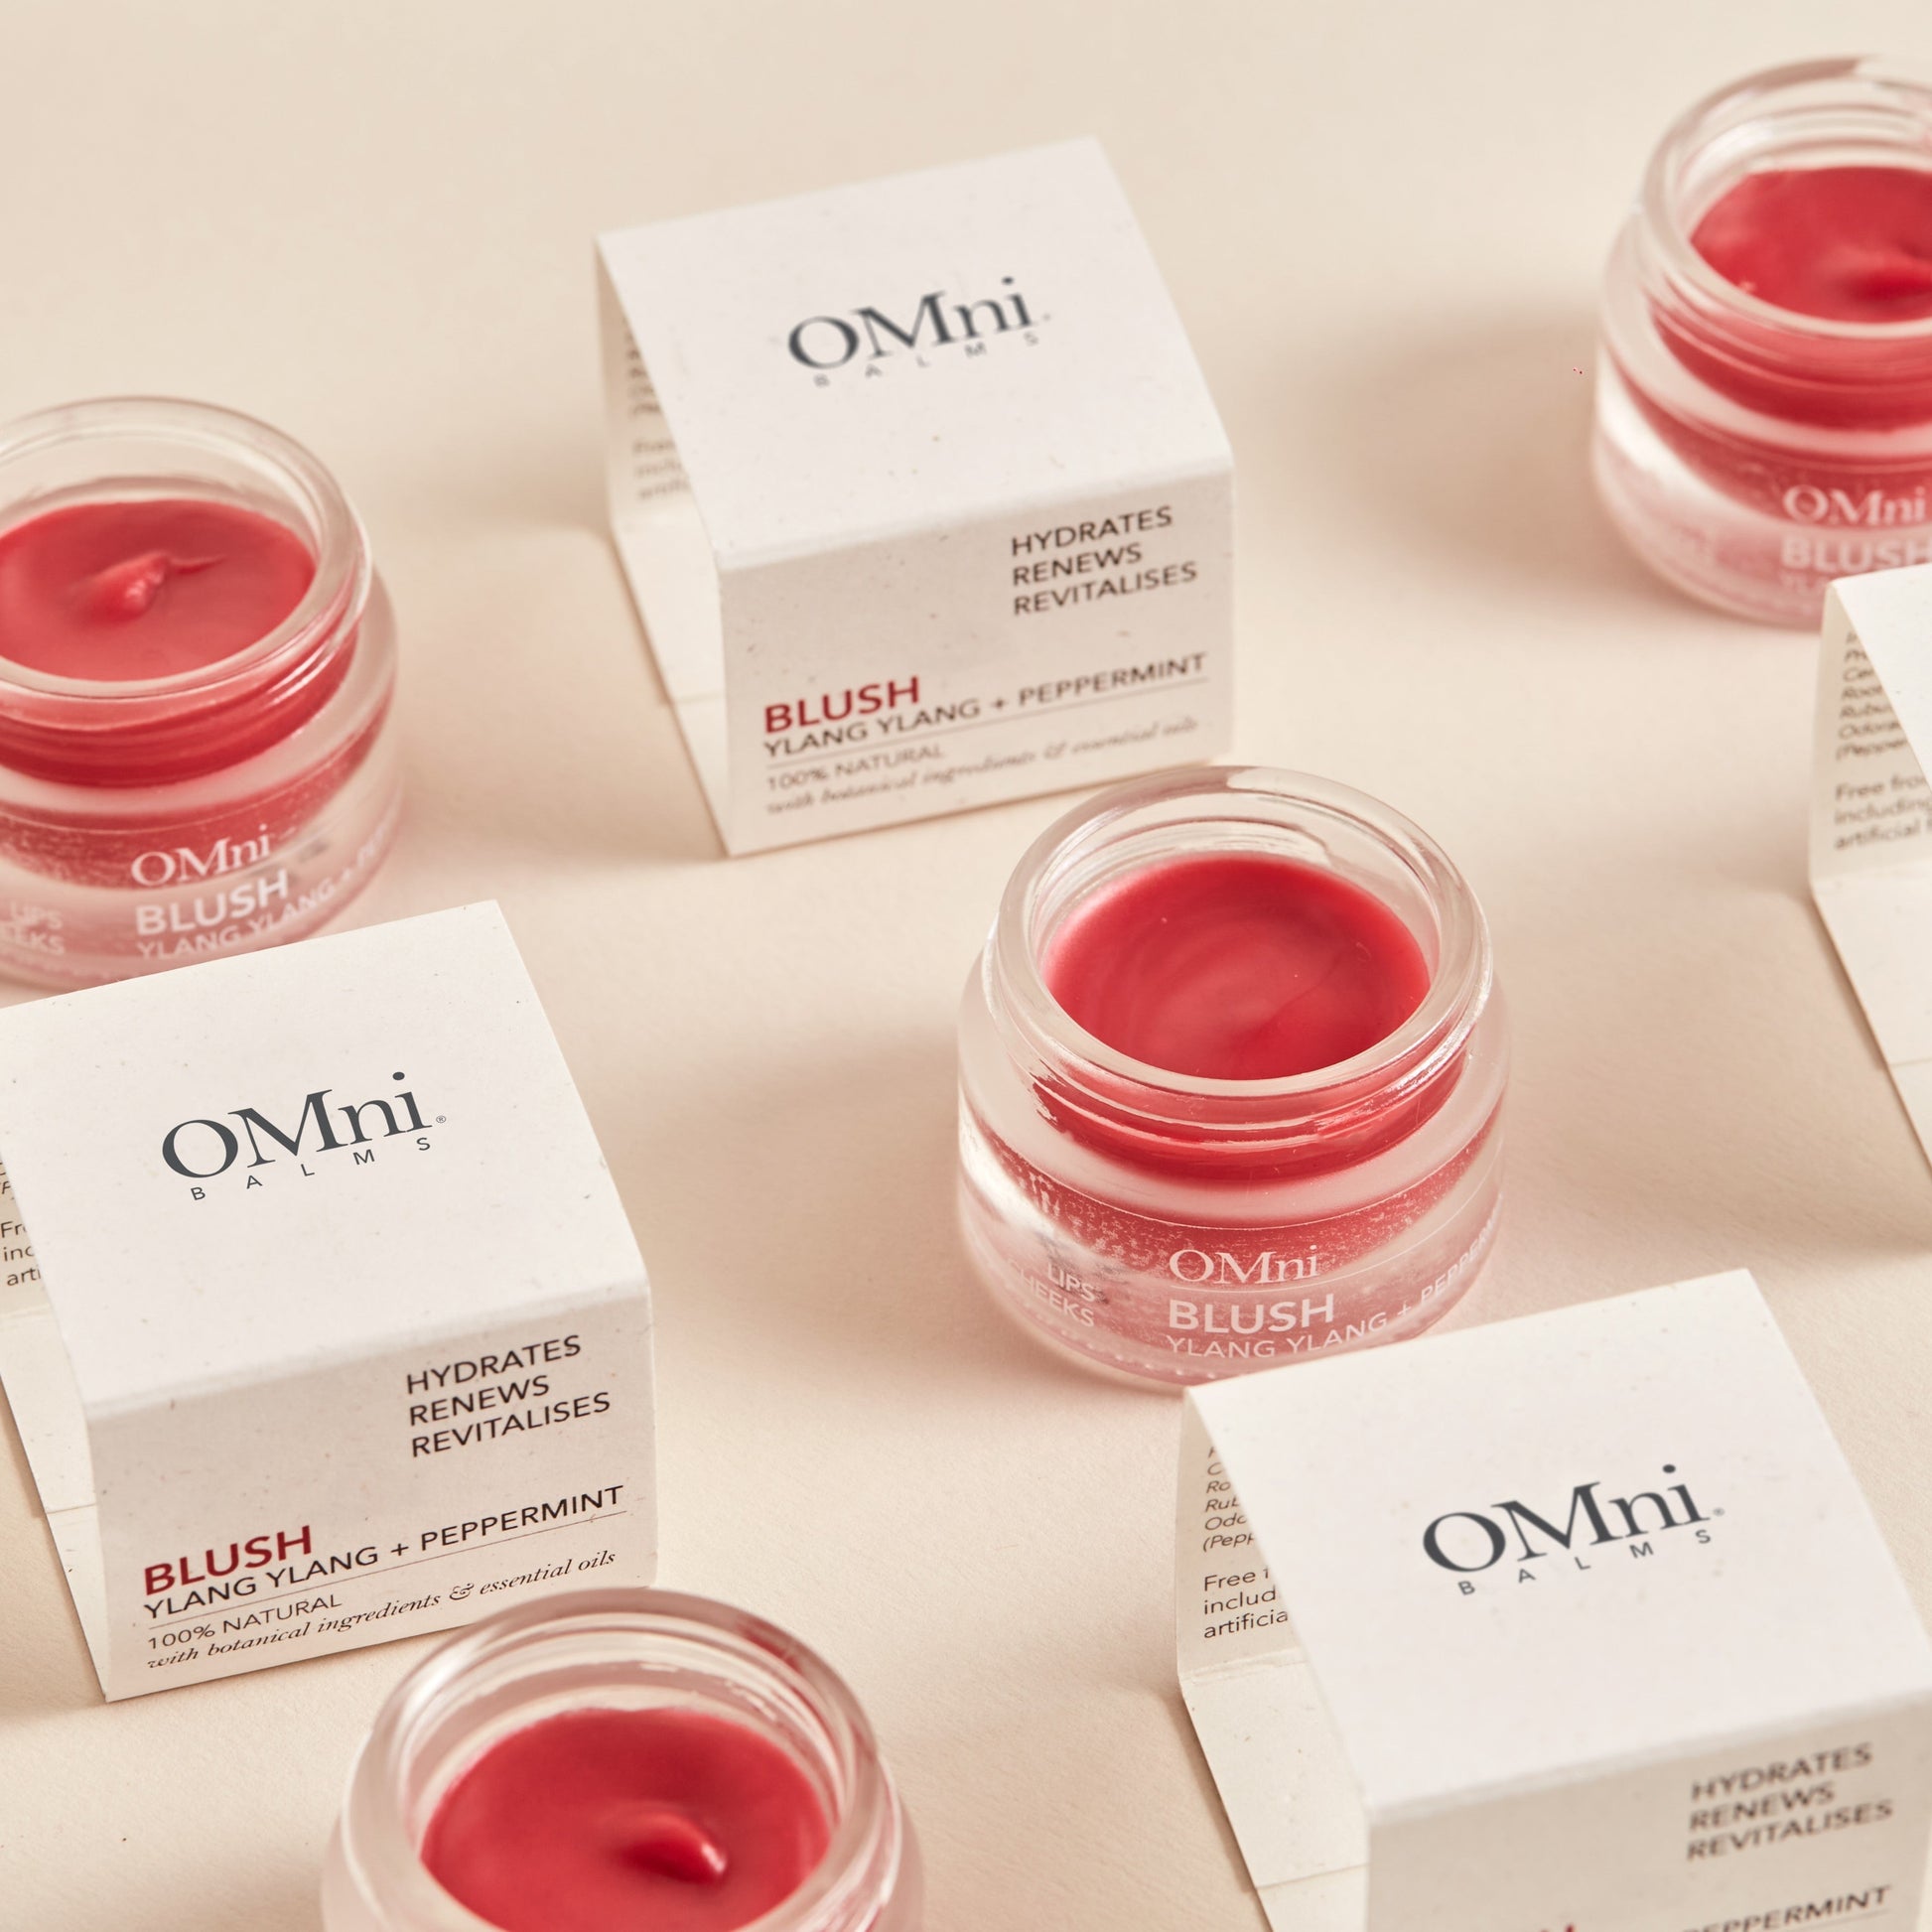 OMni Blush natural multi-use balm for dry lips and skin, and blush on cheeks